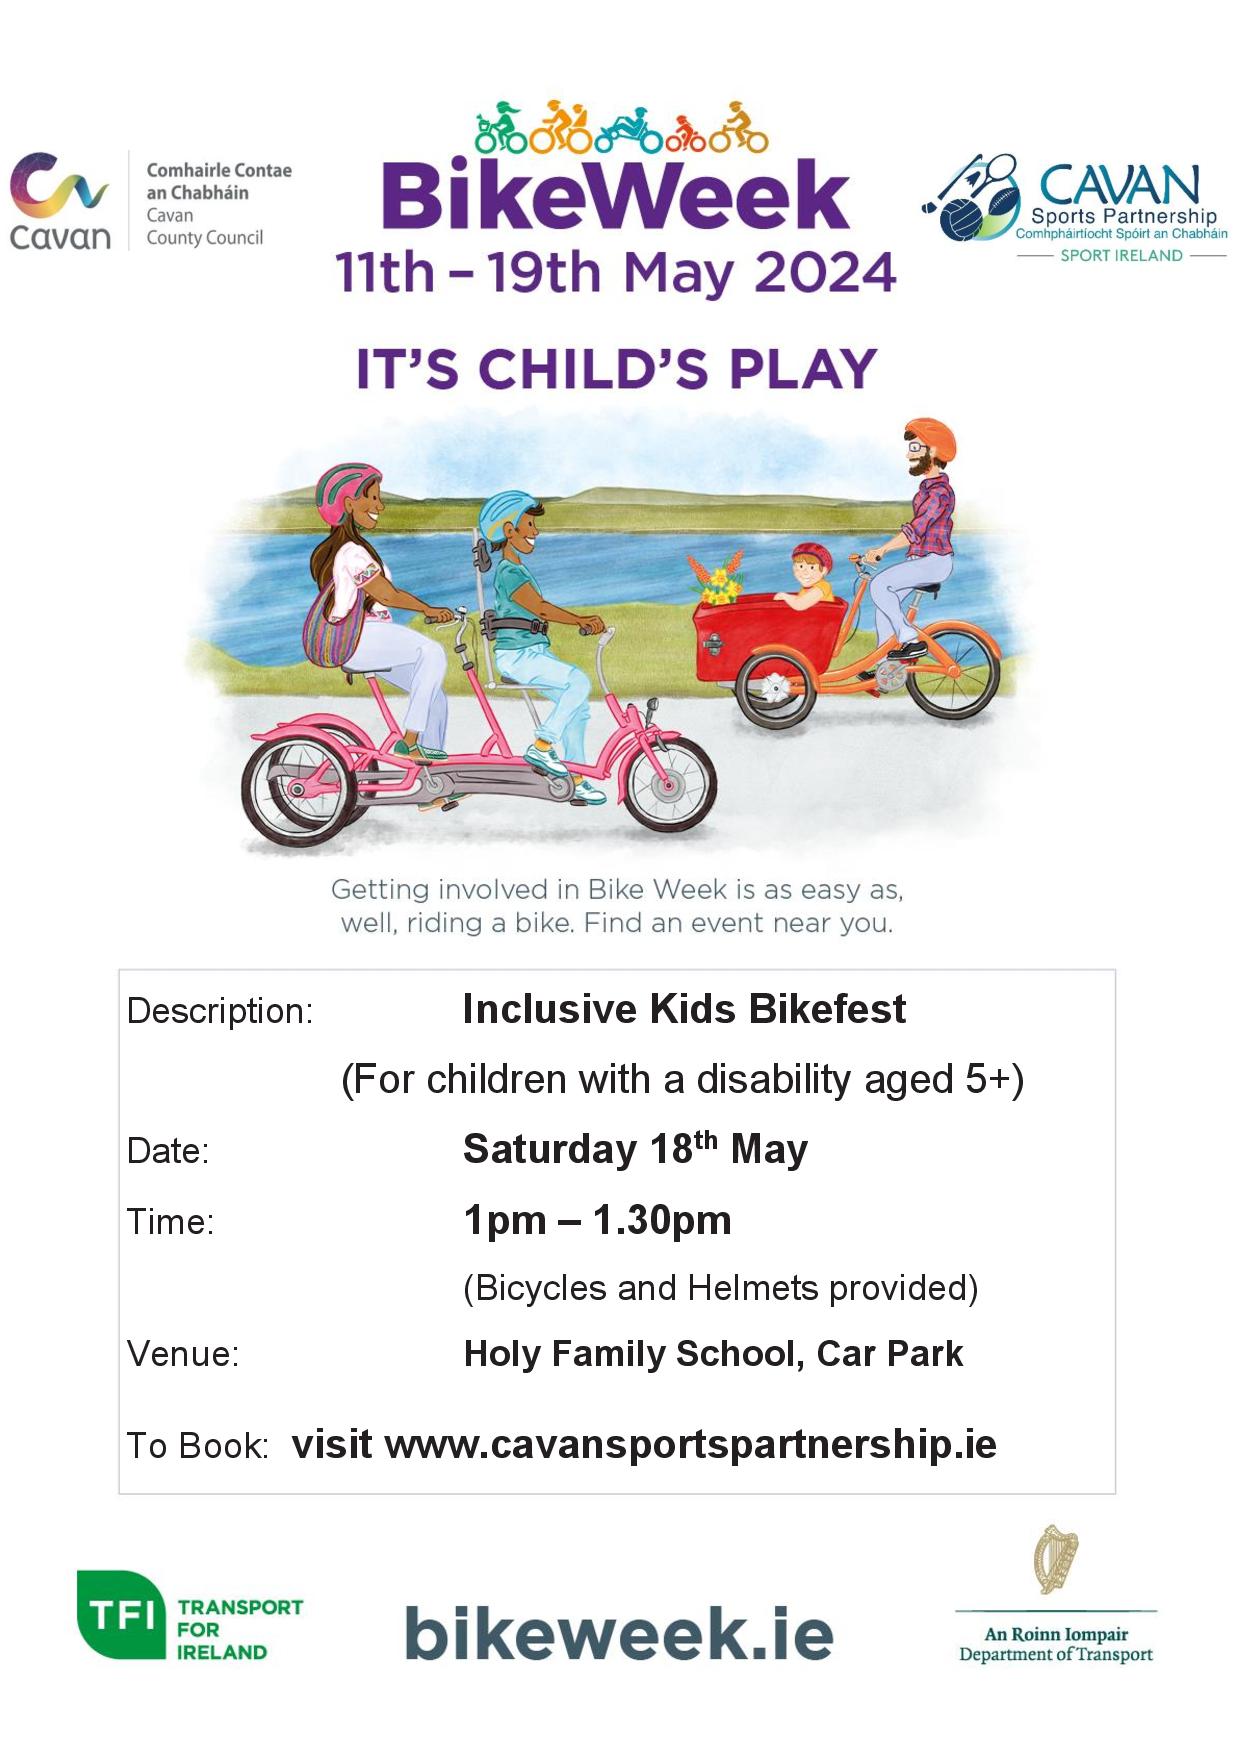 Inclusive Kids Bikefest (for children with a disability) Cootehill